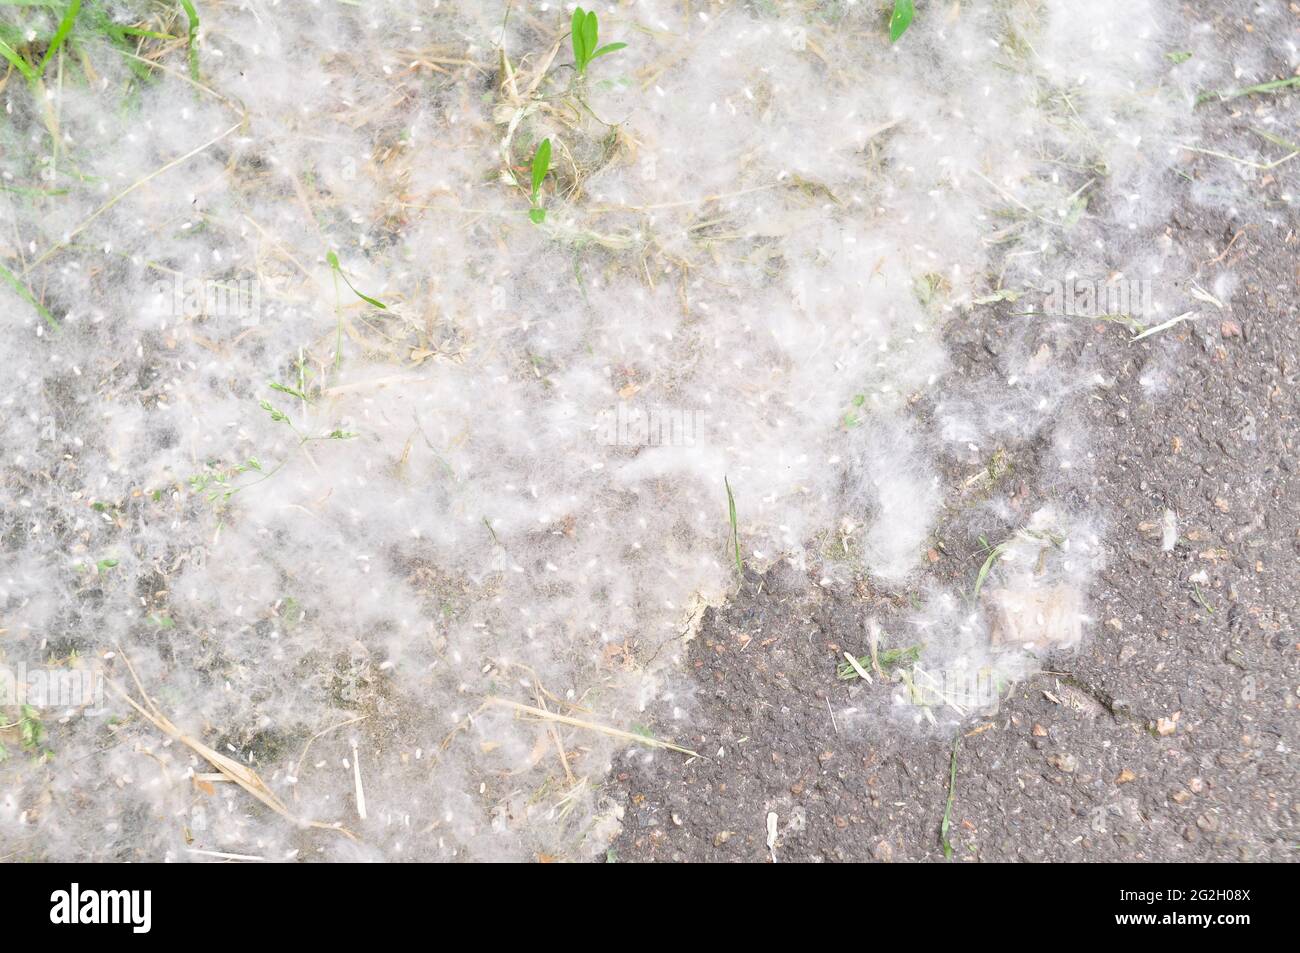 Poplar Fluff White Cotton Stock Photo, Picture and Royalty Free